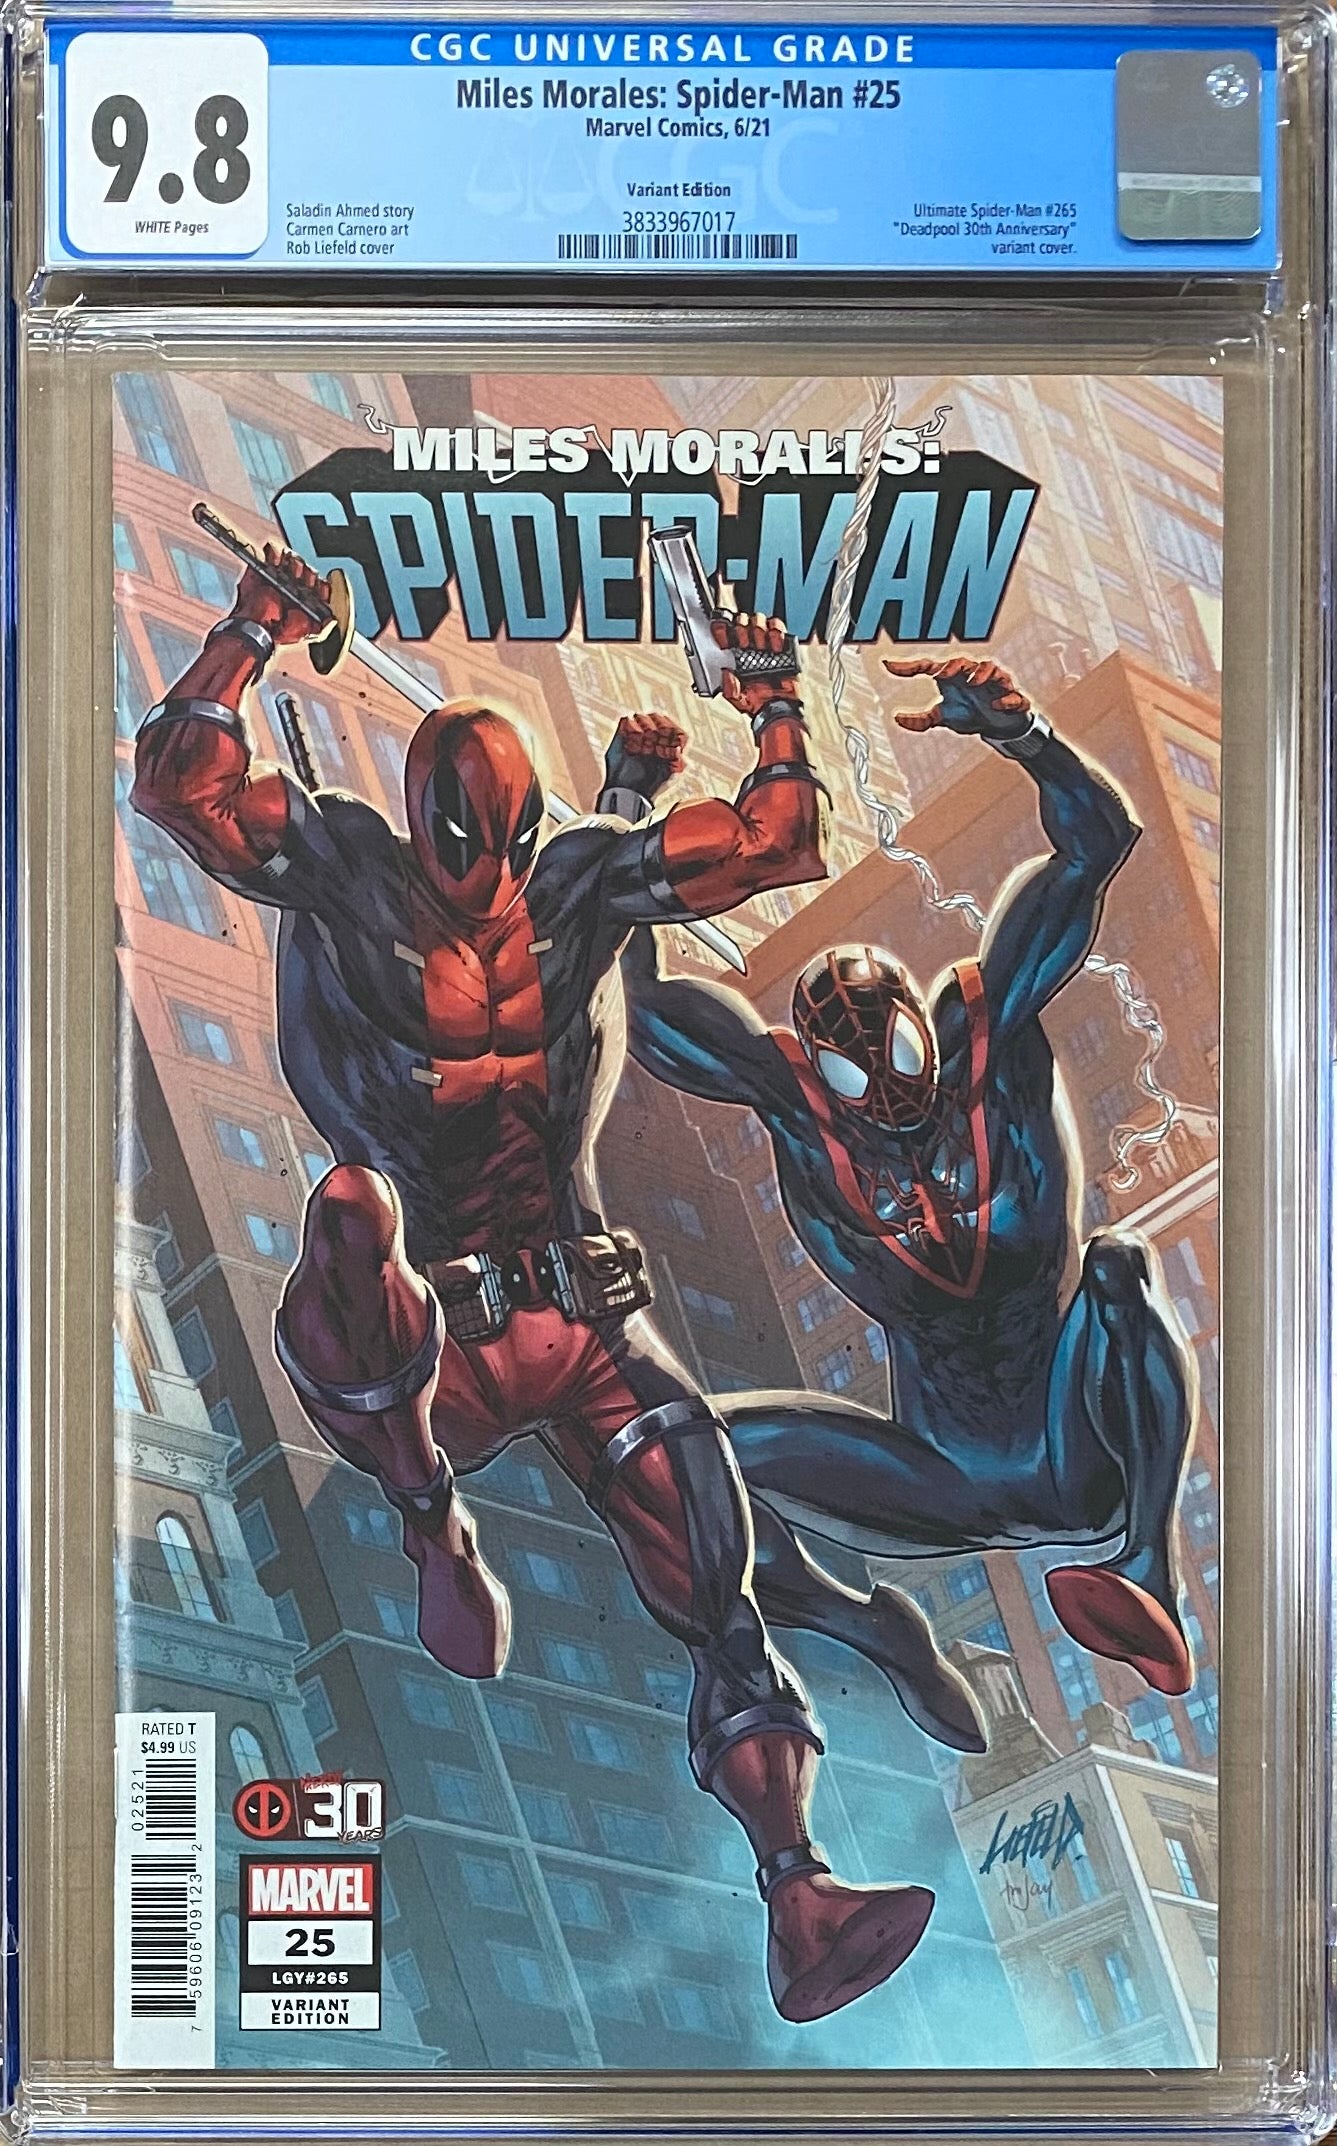 Miles Morales: Spider-Man #25 Liefeld "Deadpool 30th Anniversary" Variant CGC 9.8